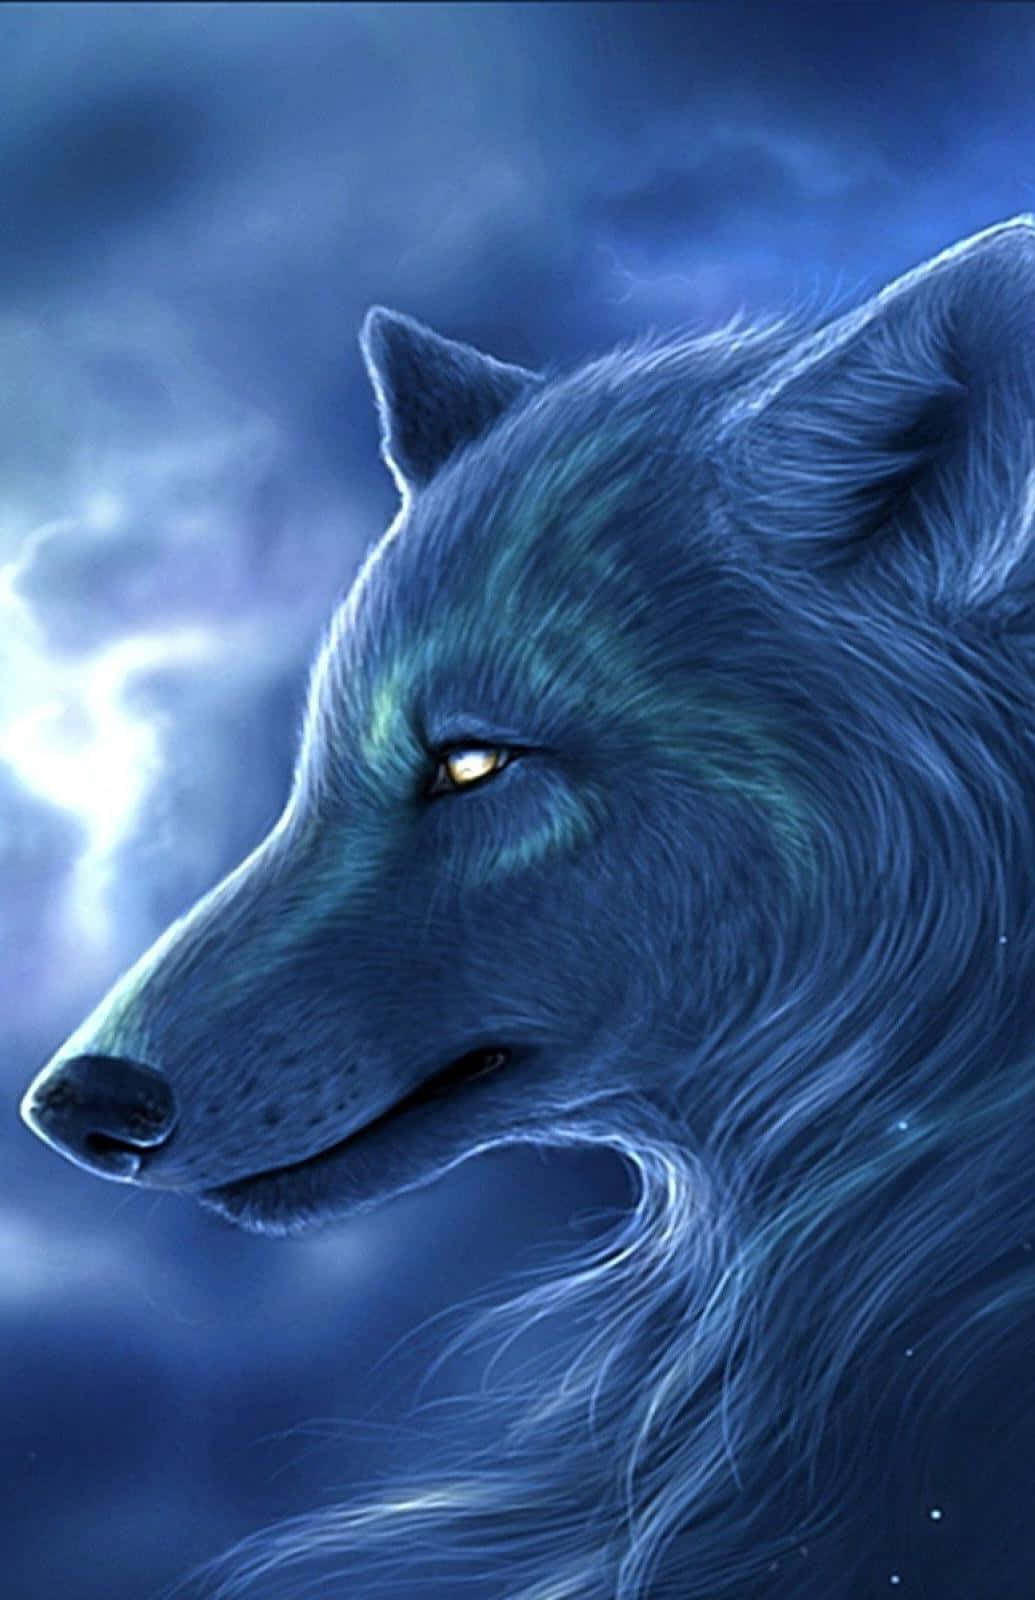 Majestic Alpha Wolf Gazing into the Distance Wallpaper